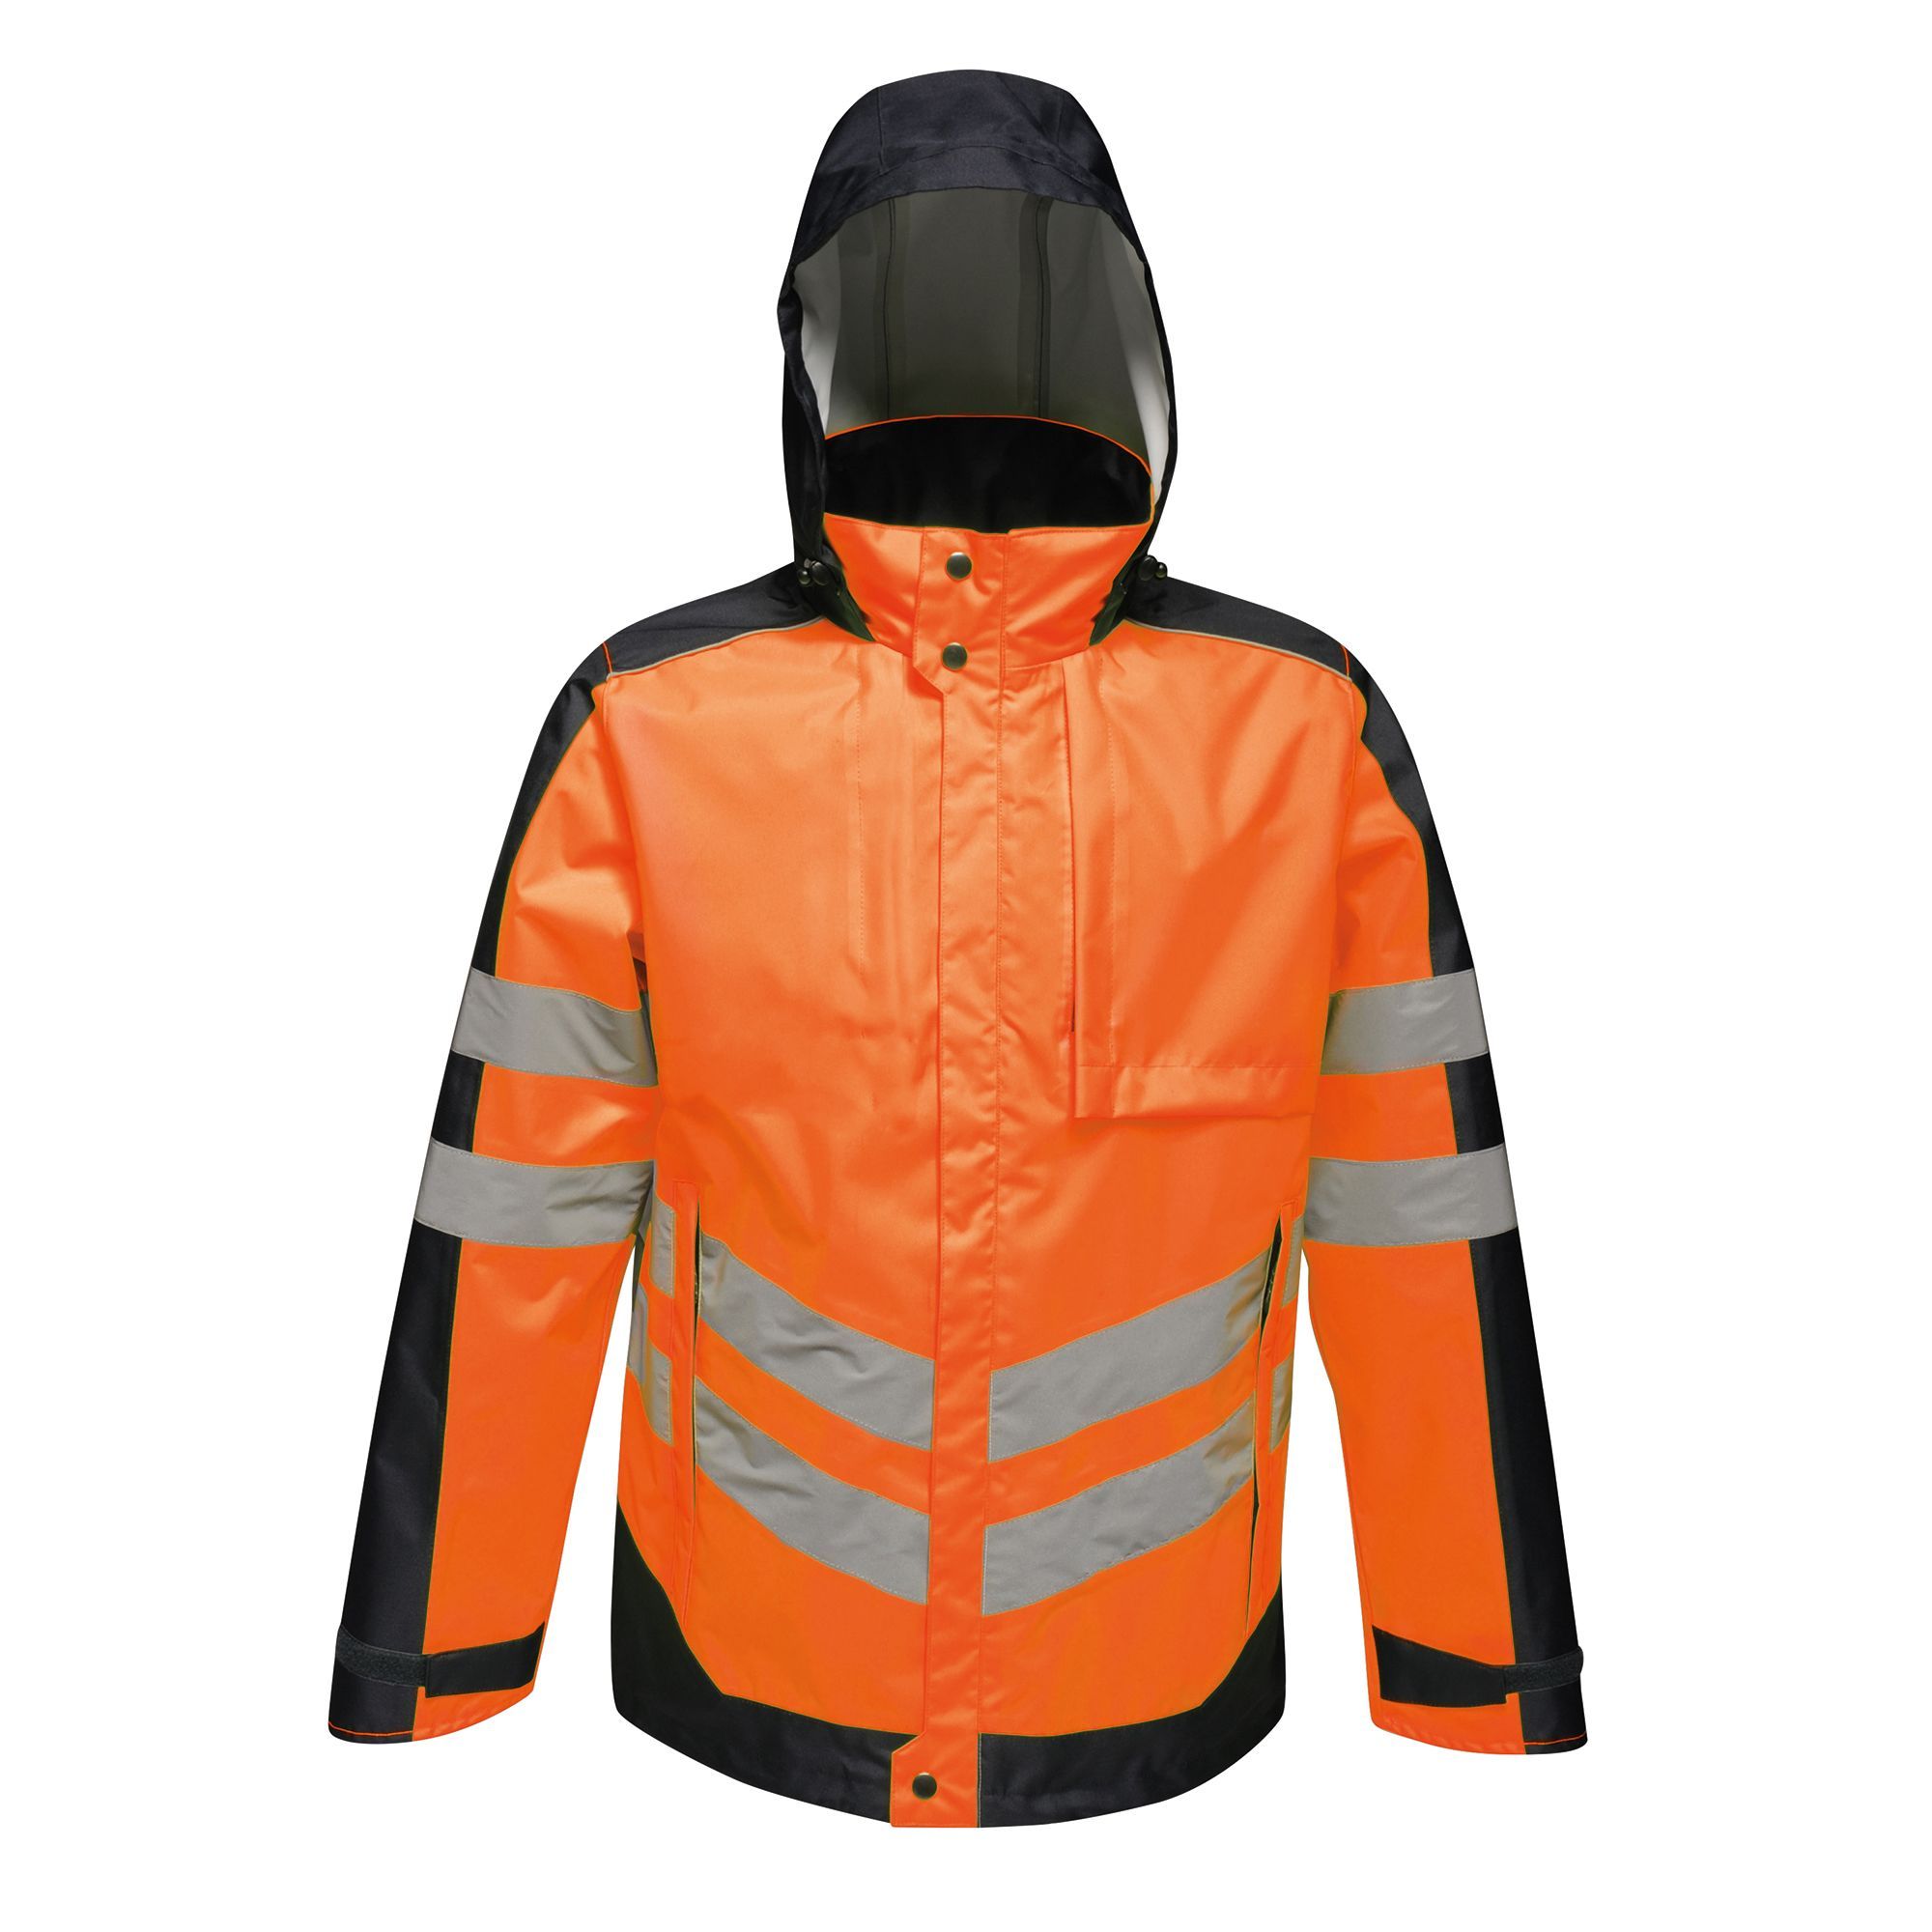 Material: 100% polyester. Isotex 10000 polyester fabric. Waterproof and breathable. Conforms to EN343:2003 A1:2007 Class 3:3. EN ISO 20471:2013 + A1:2016 Class 3. Windproof. Thermoguard insulation. Taped seams. Concealed hood with adjusters. 2 zipped lower pockets and easy access, hidden chest pockets with zip. Orange colour-way also conforms to RIS-3279/TOM when worn with RIS-3279-TOM Class 2 upper body cloth. Inner stormflap with chin guard. Size (chest): (XXS) 32-34in, (XS) 35-36in, (S) 37-38in, (M) 39-40in, (L) 41-42in, (XL) 43-44in, (XXL) 46-48in, (3XL) 49-51in, (4XL) 52-54in, (5XL) 55-57in, (6XL) 58-60in.